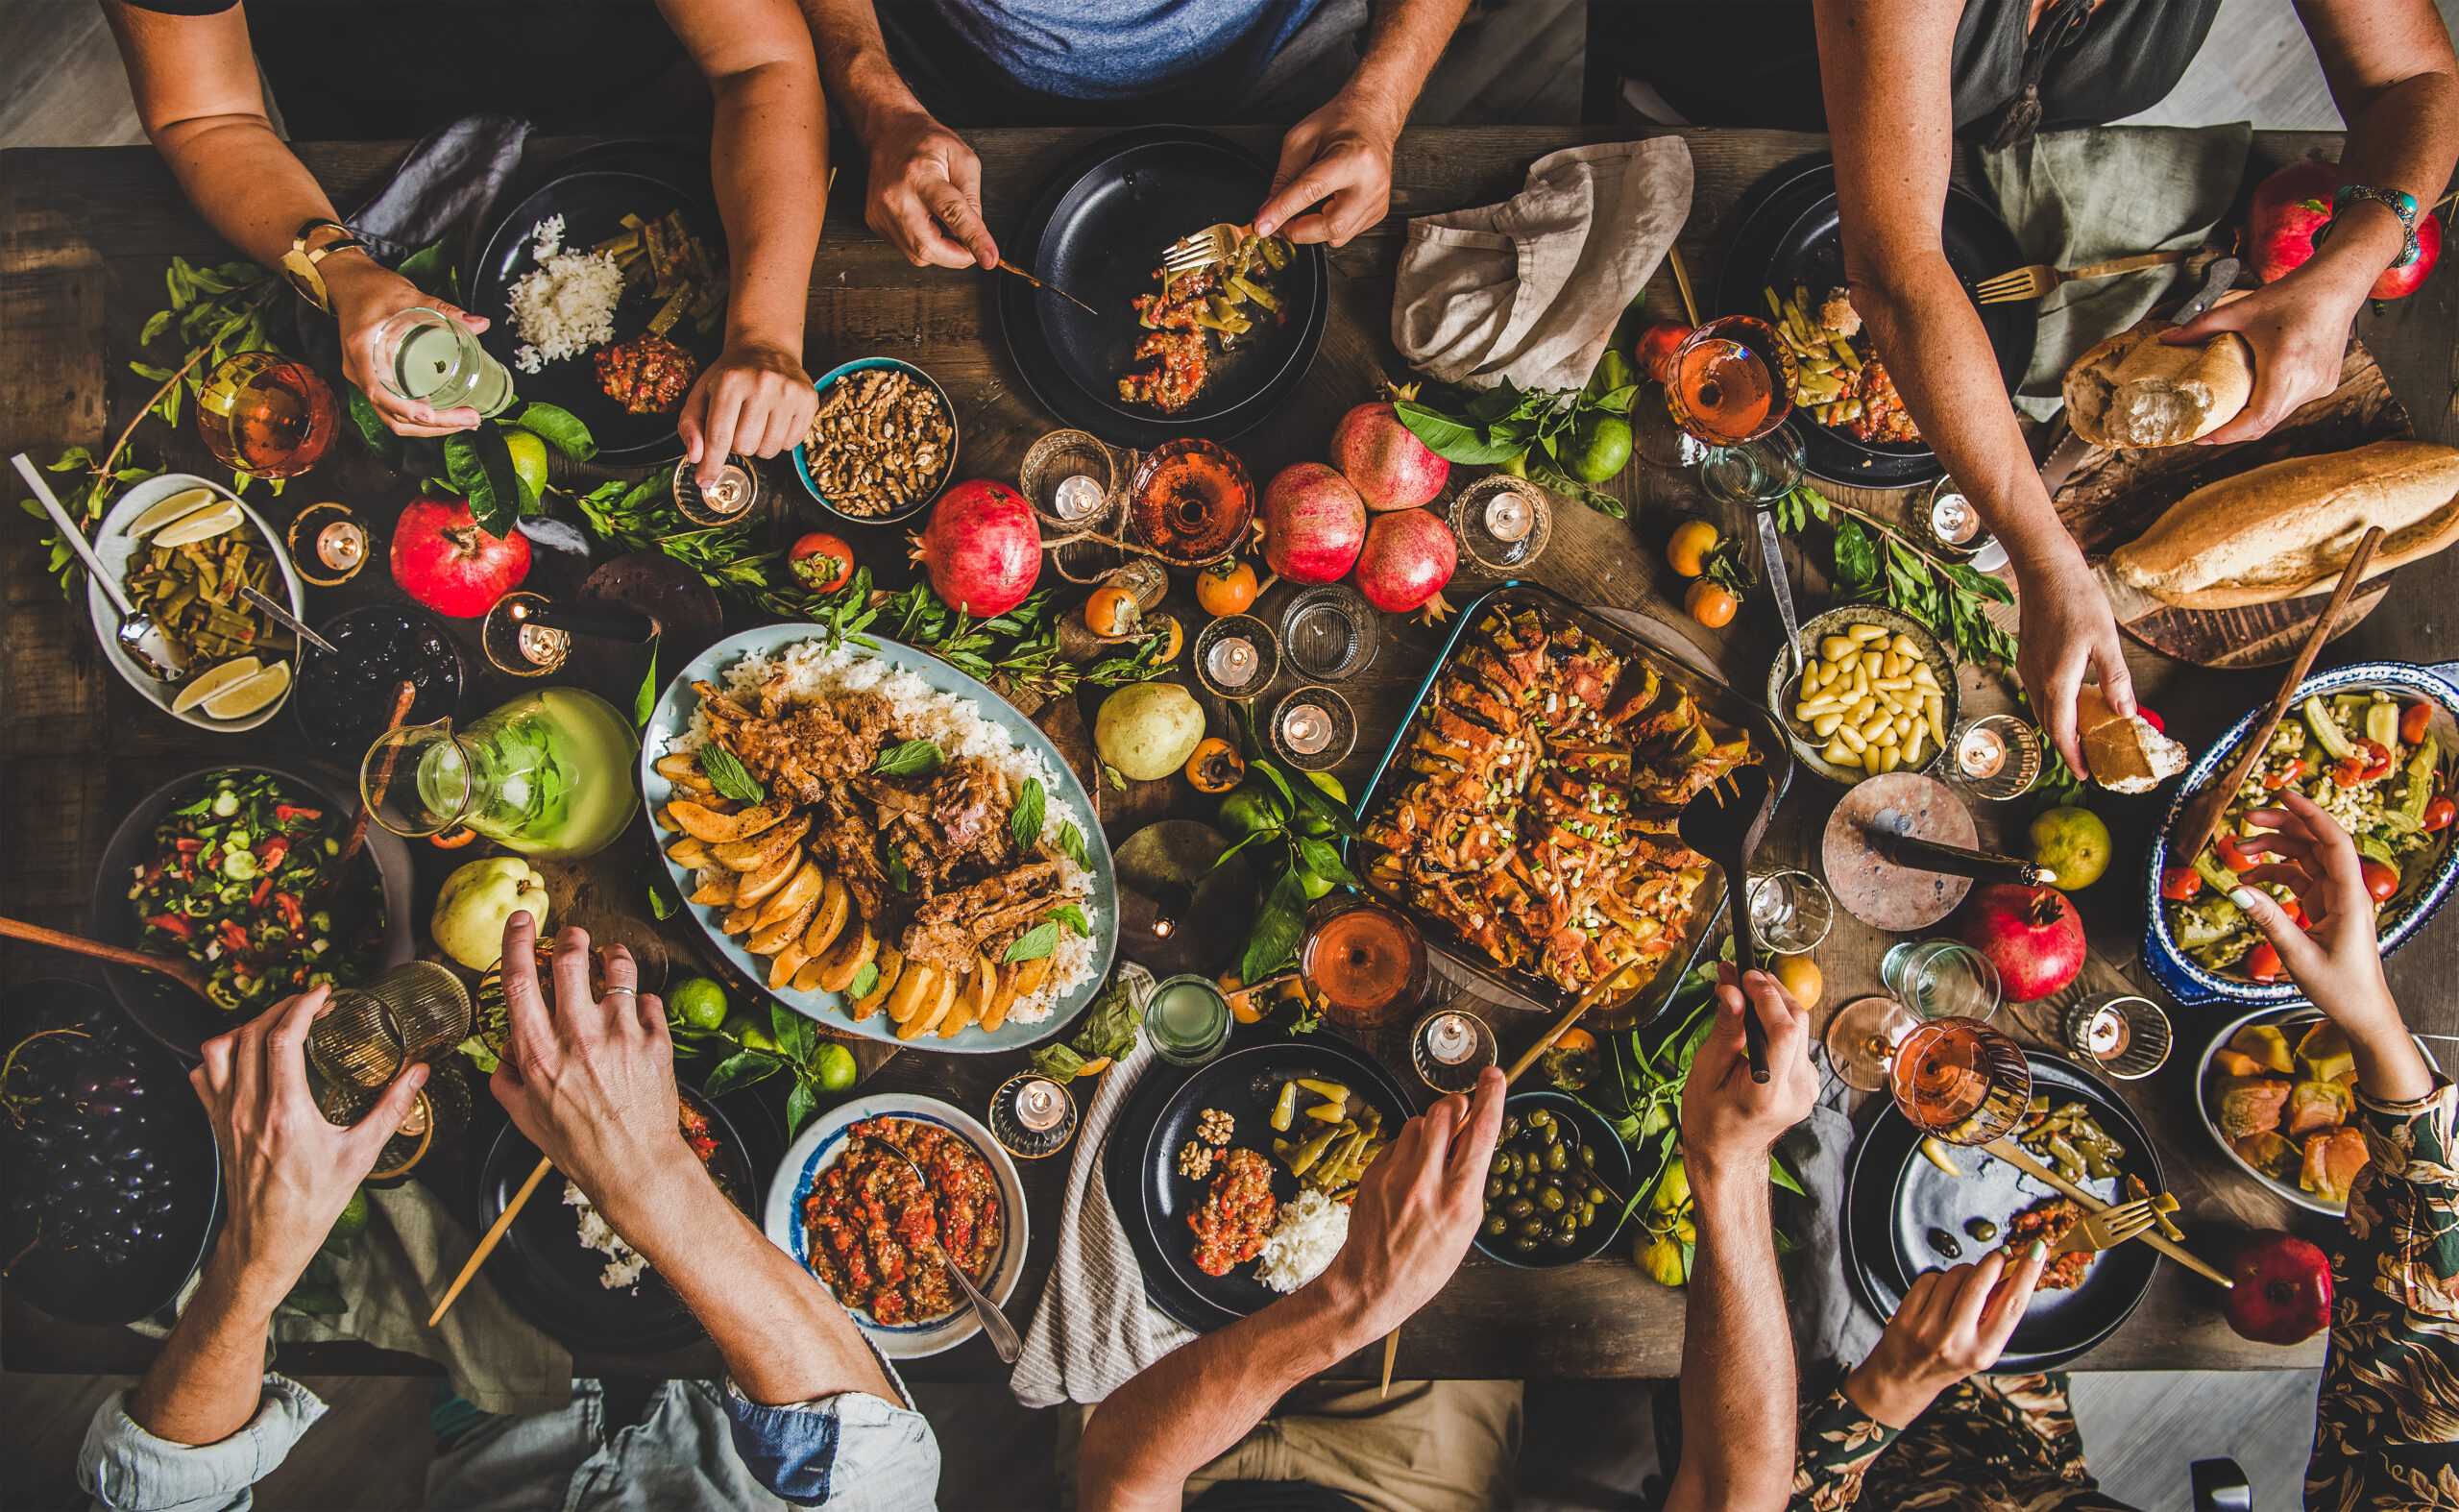 A gathering of friends and family around a dinner table, shot from above to show a huge spread of a variety of foods.